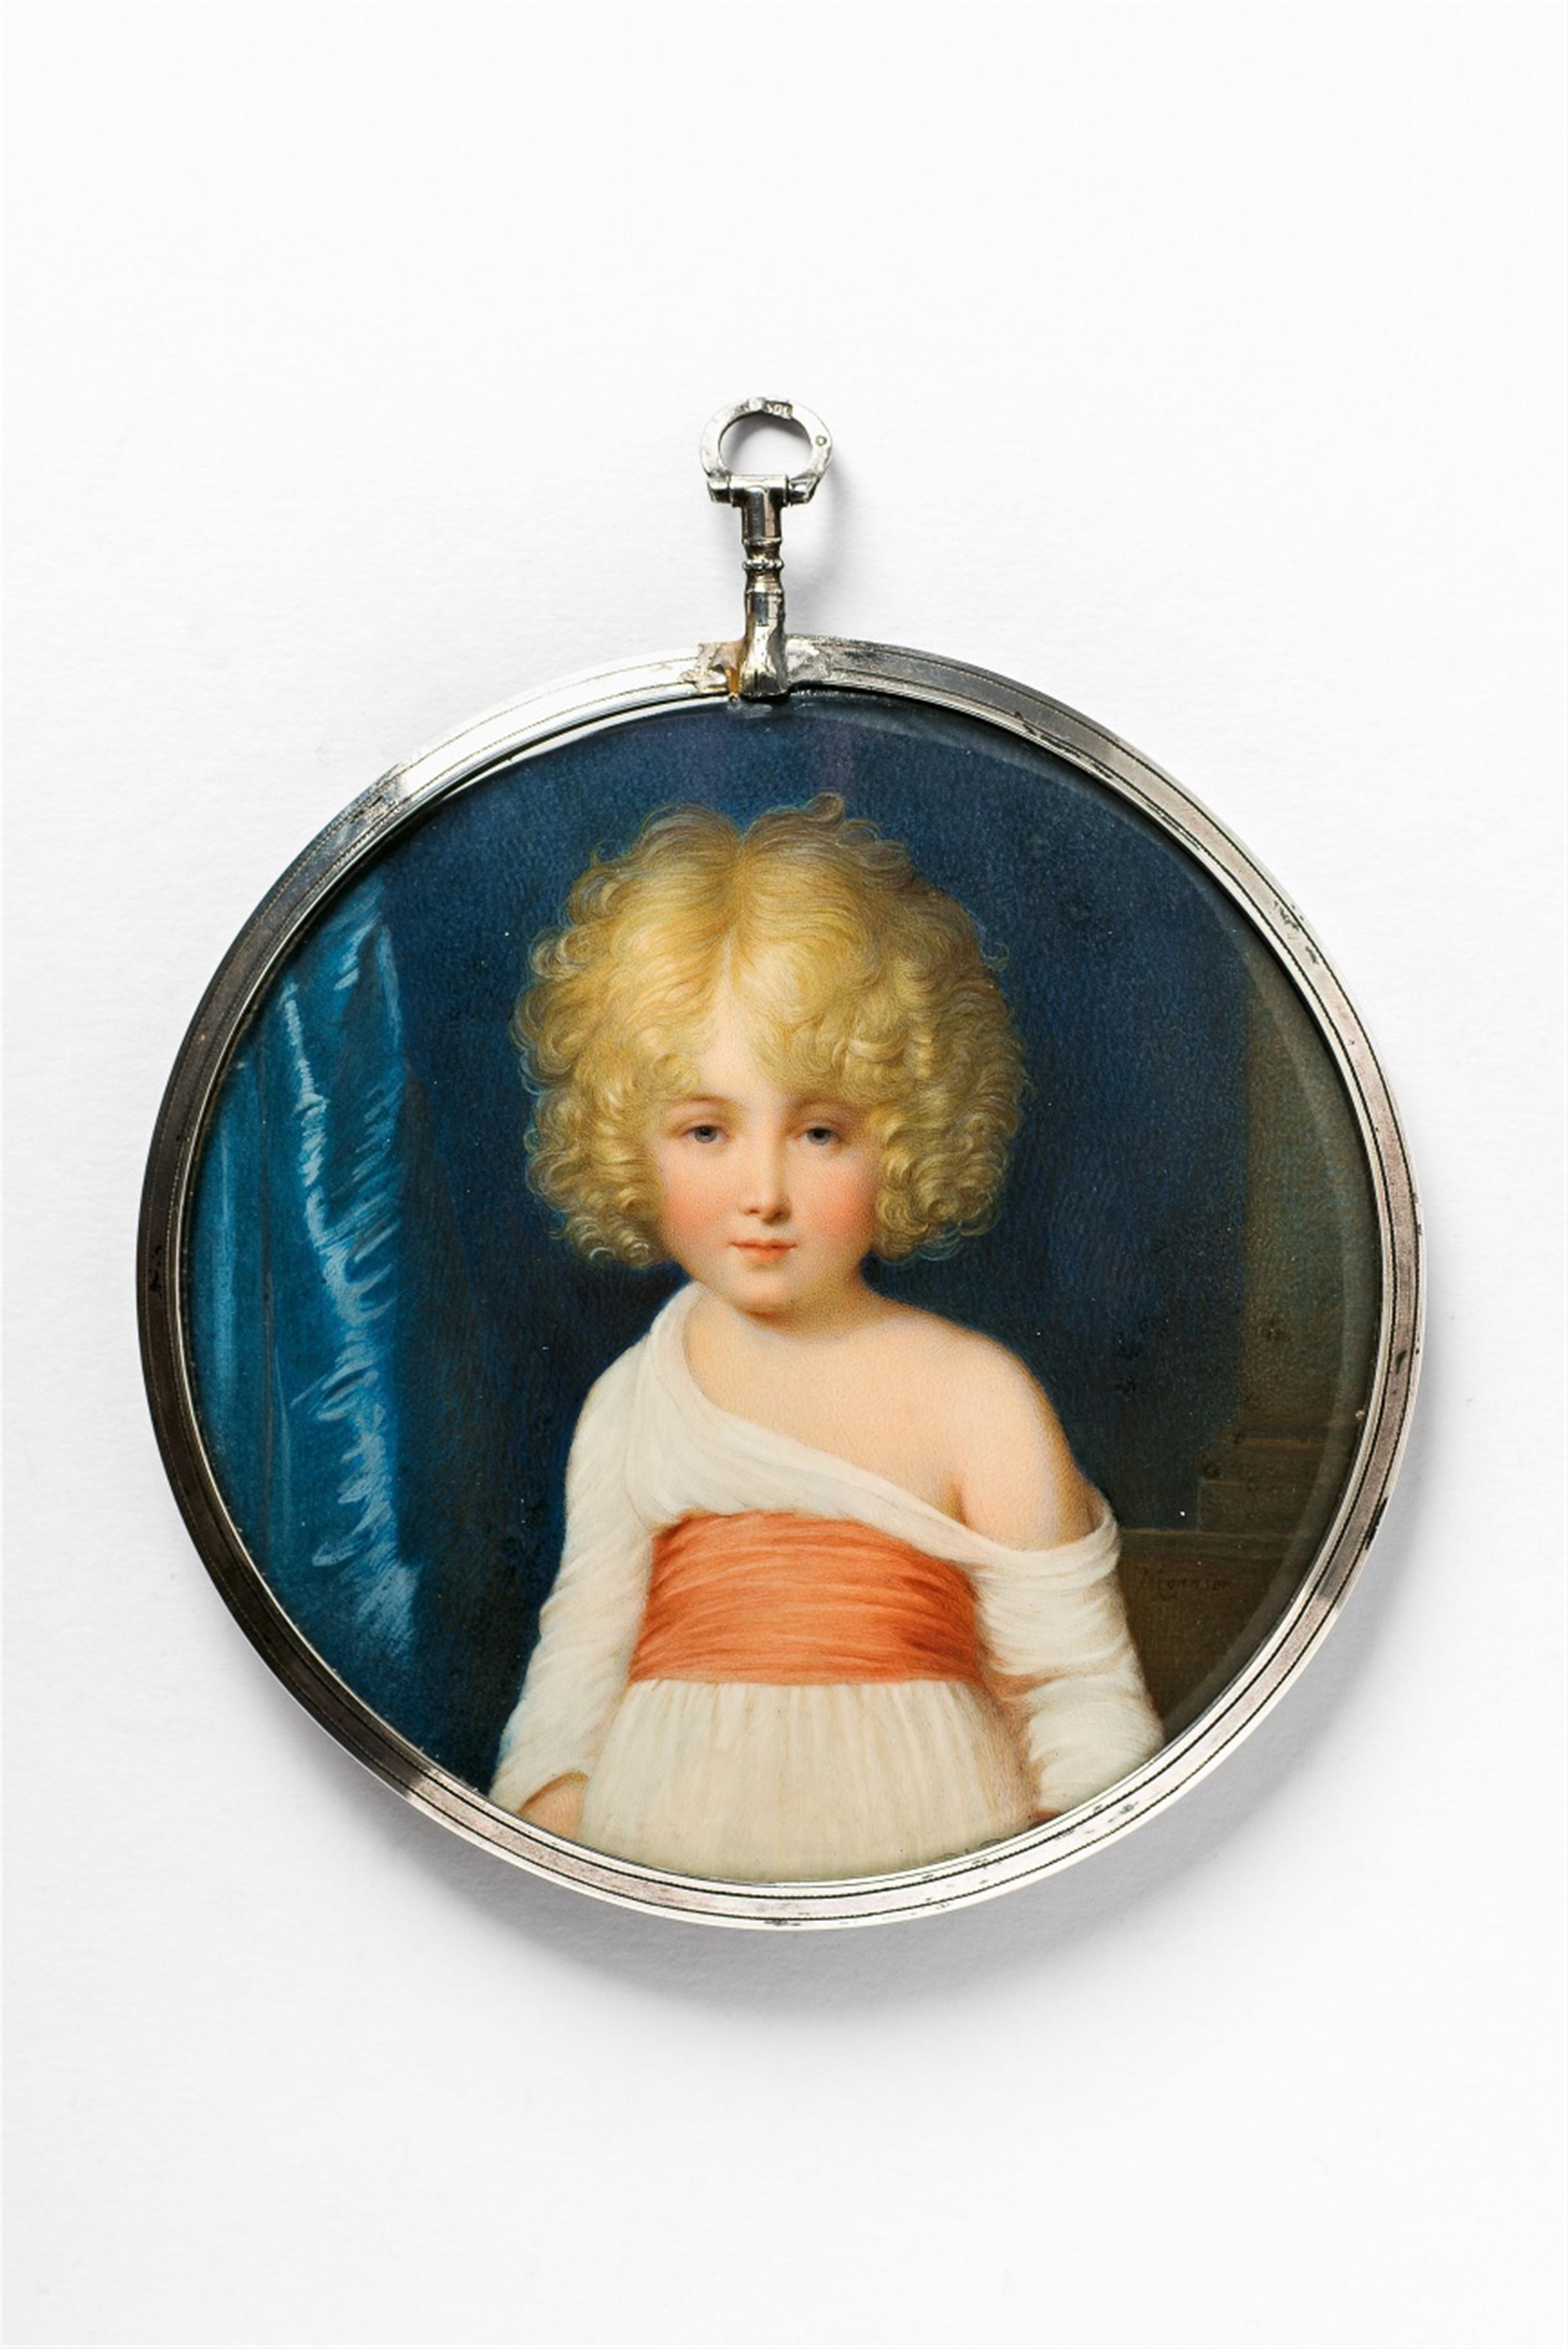 A portrait miniature of a young girl - 